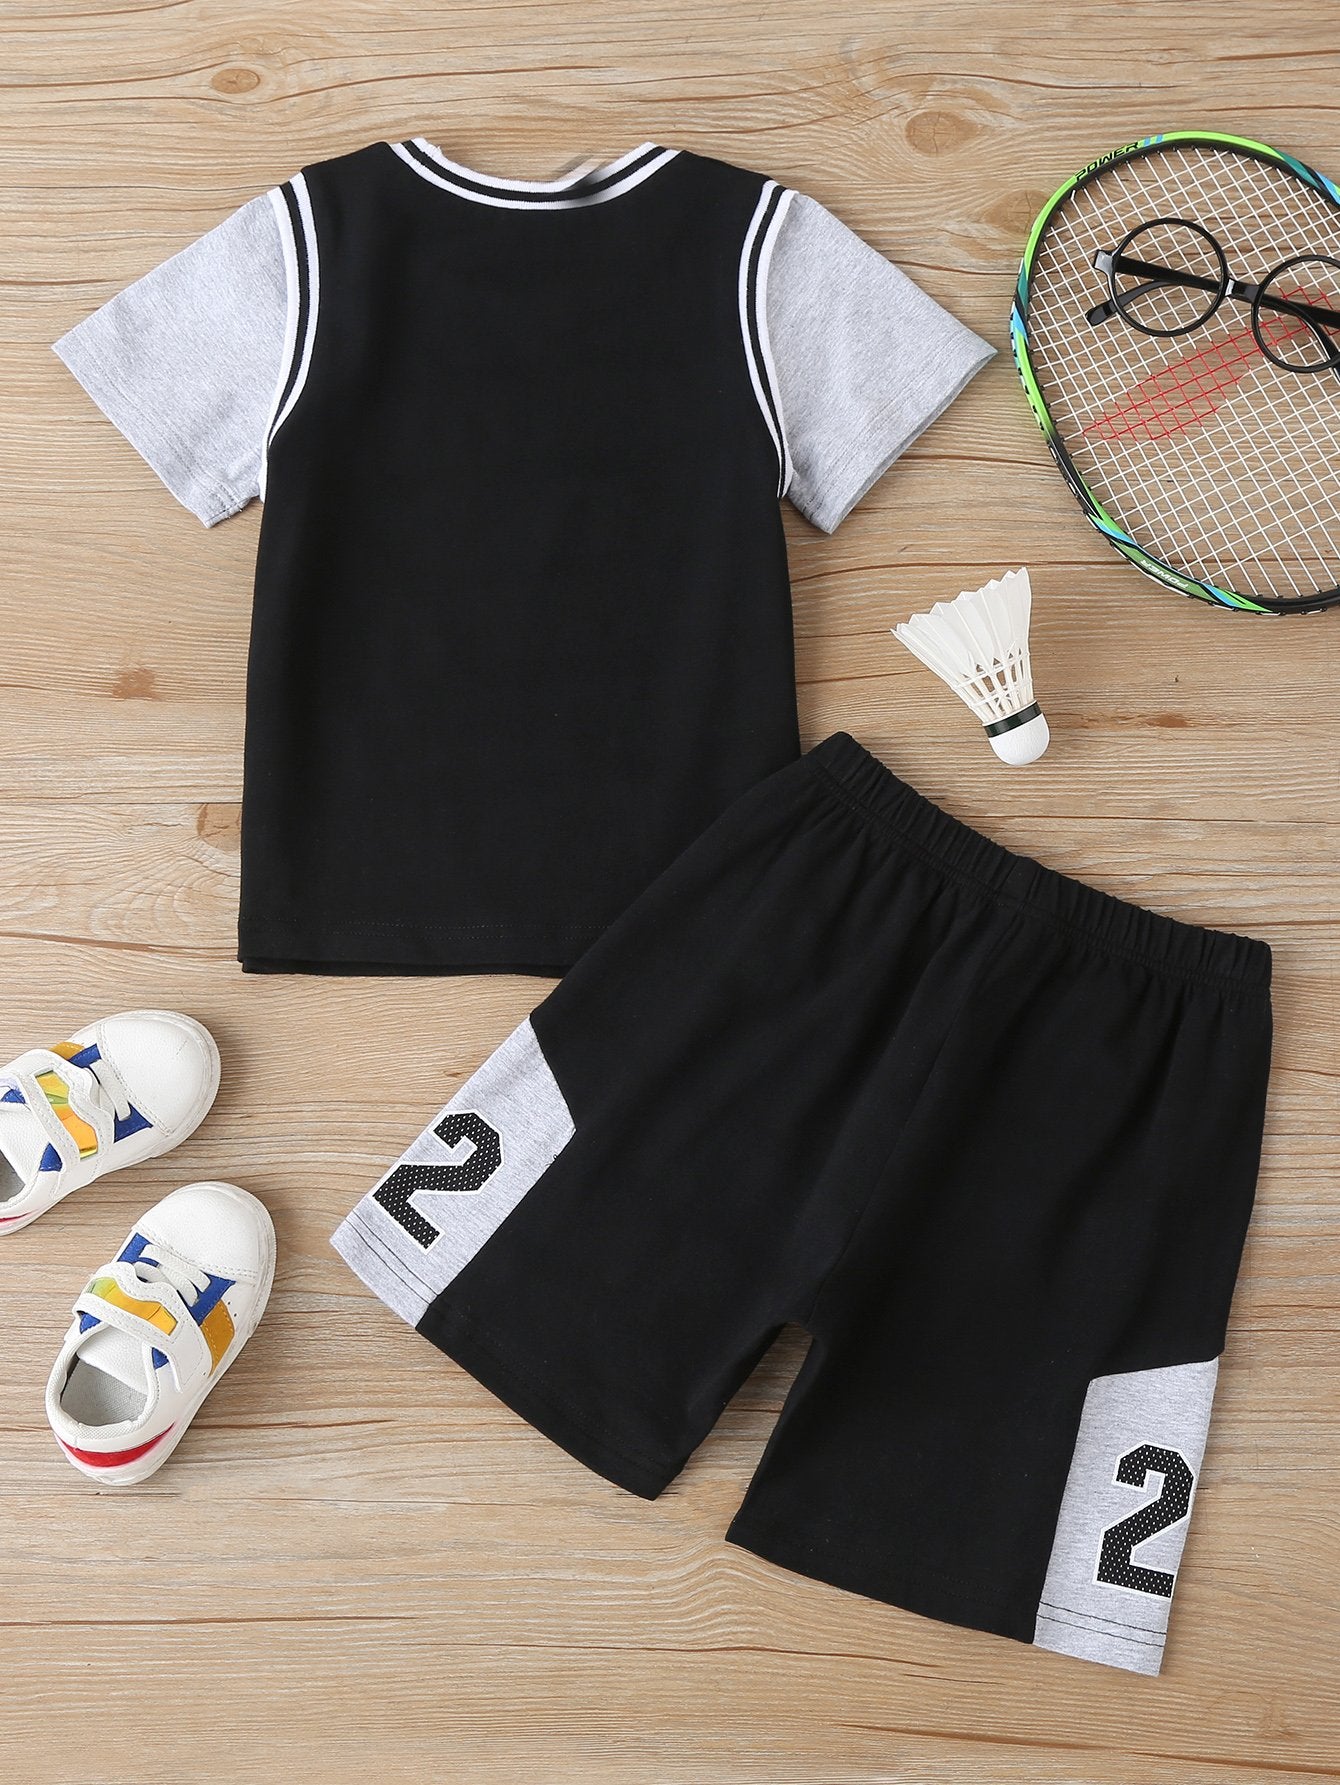 Boys Letter Printed Short Sleeve Color Contrast Top & Shorts wholesale boys clothing